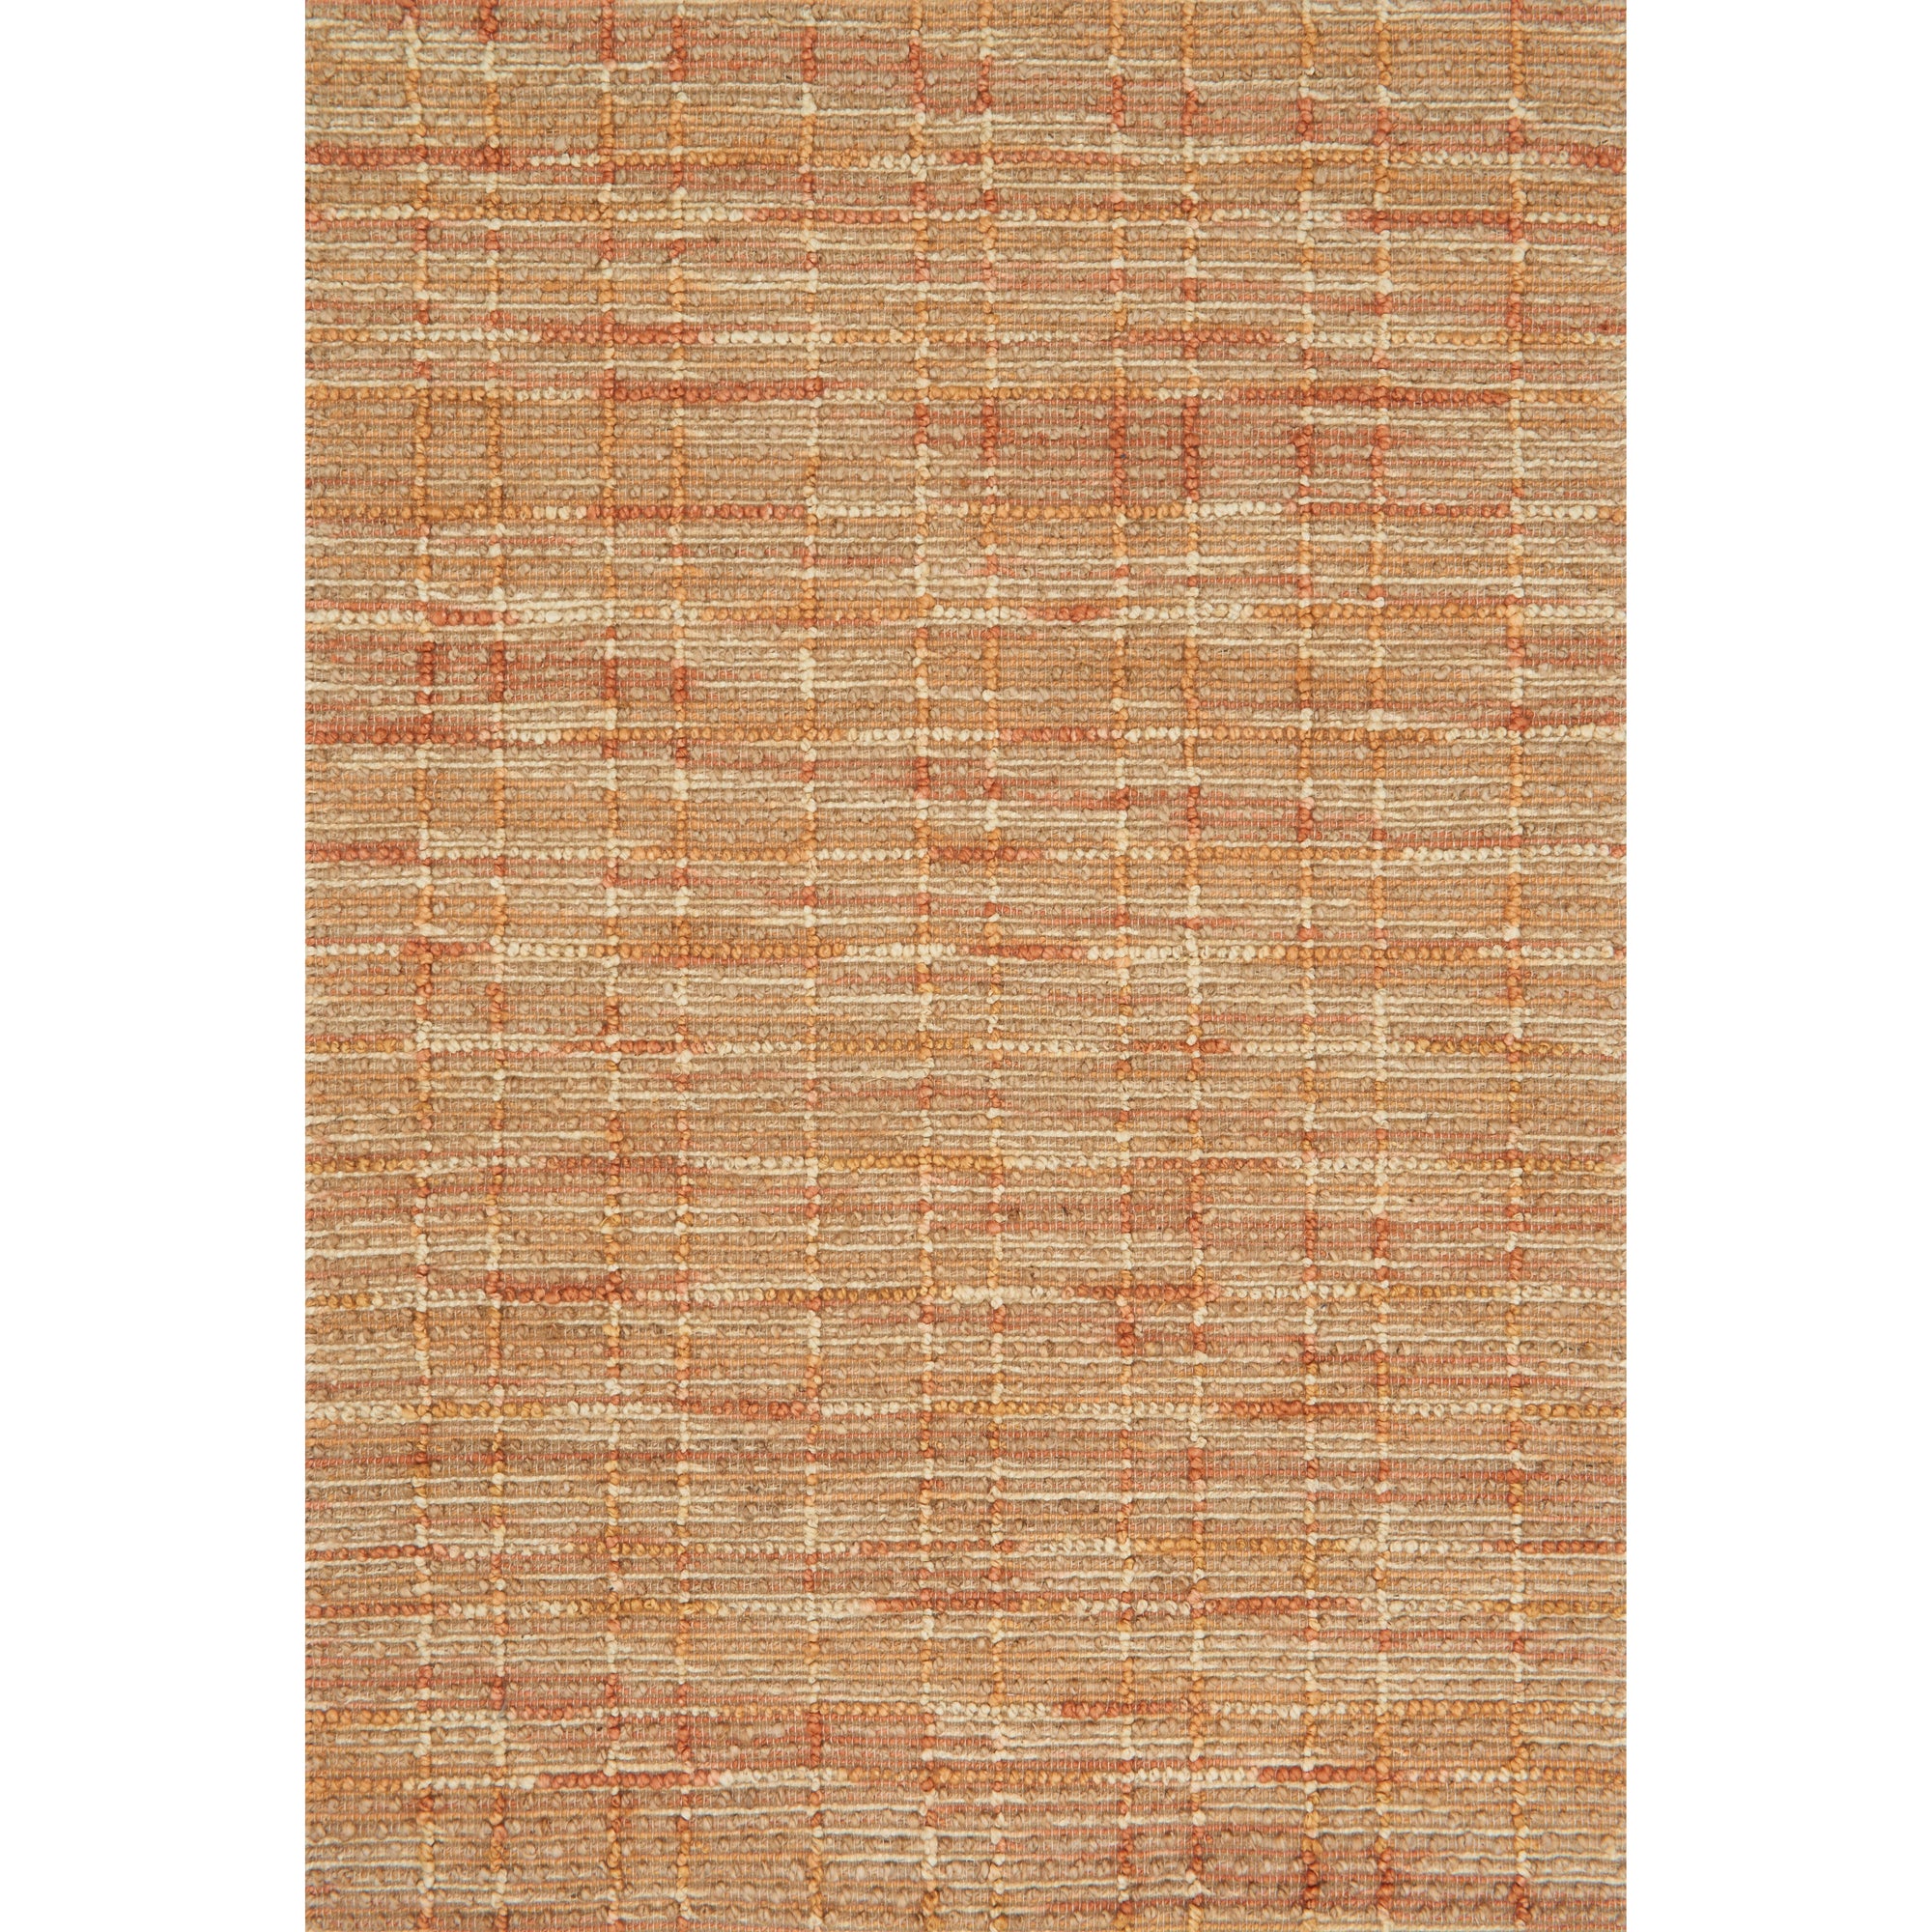 Rugs by Roo Loloi Beacon Tangerine Area Rug in size 18" x 18" Sample